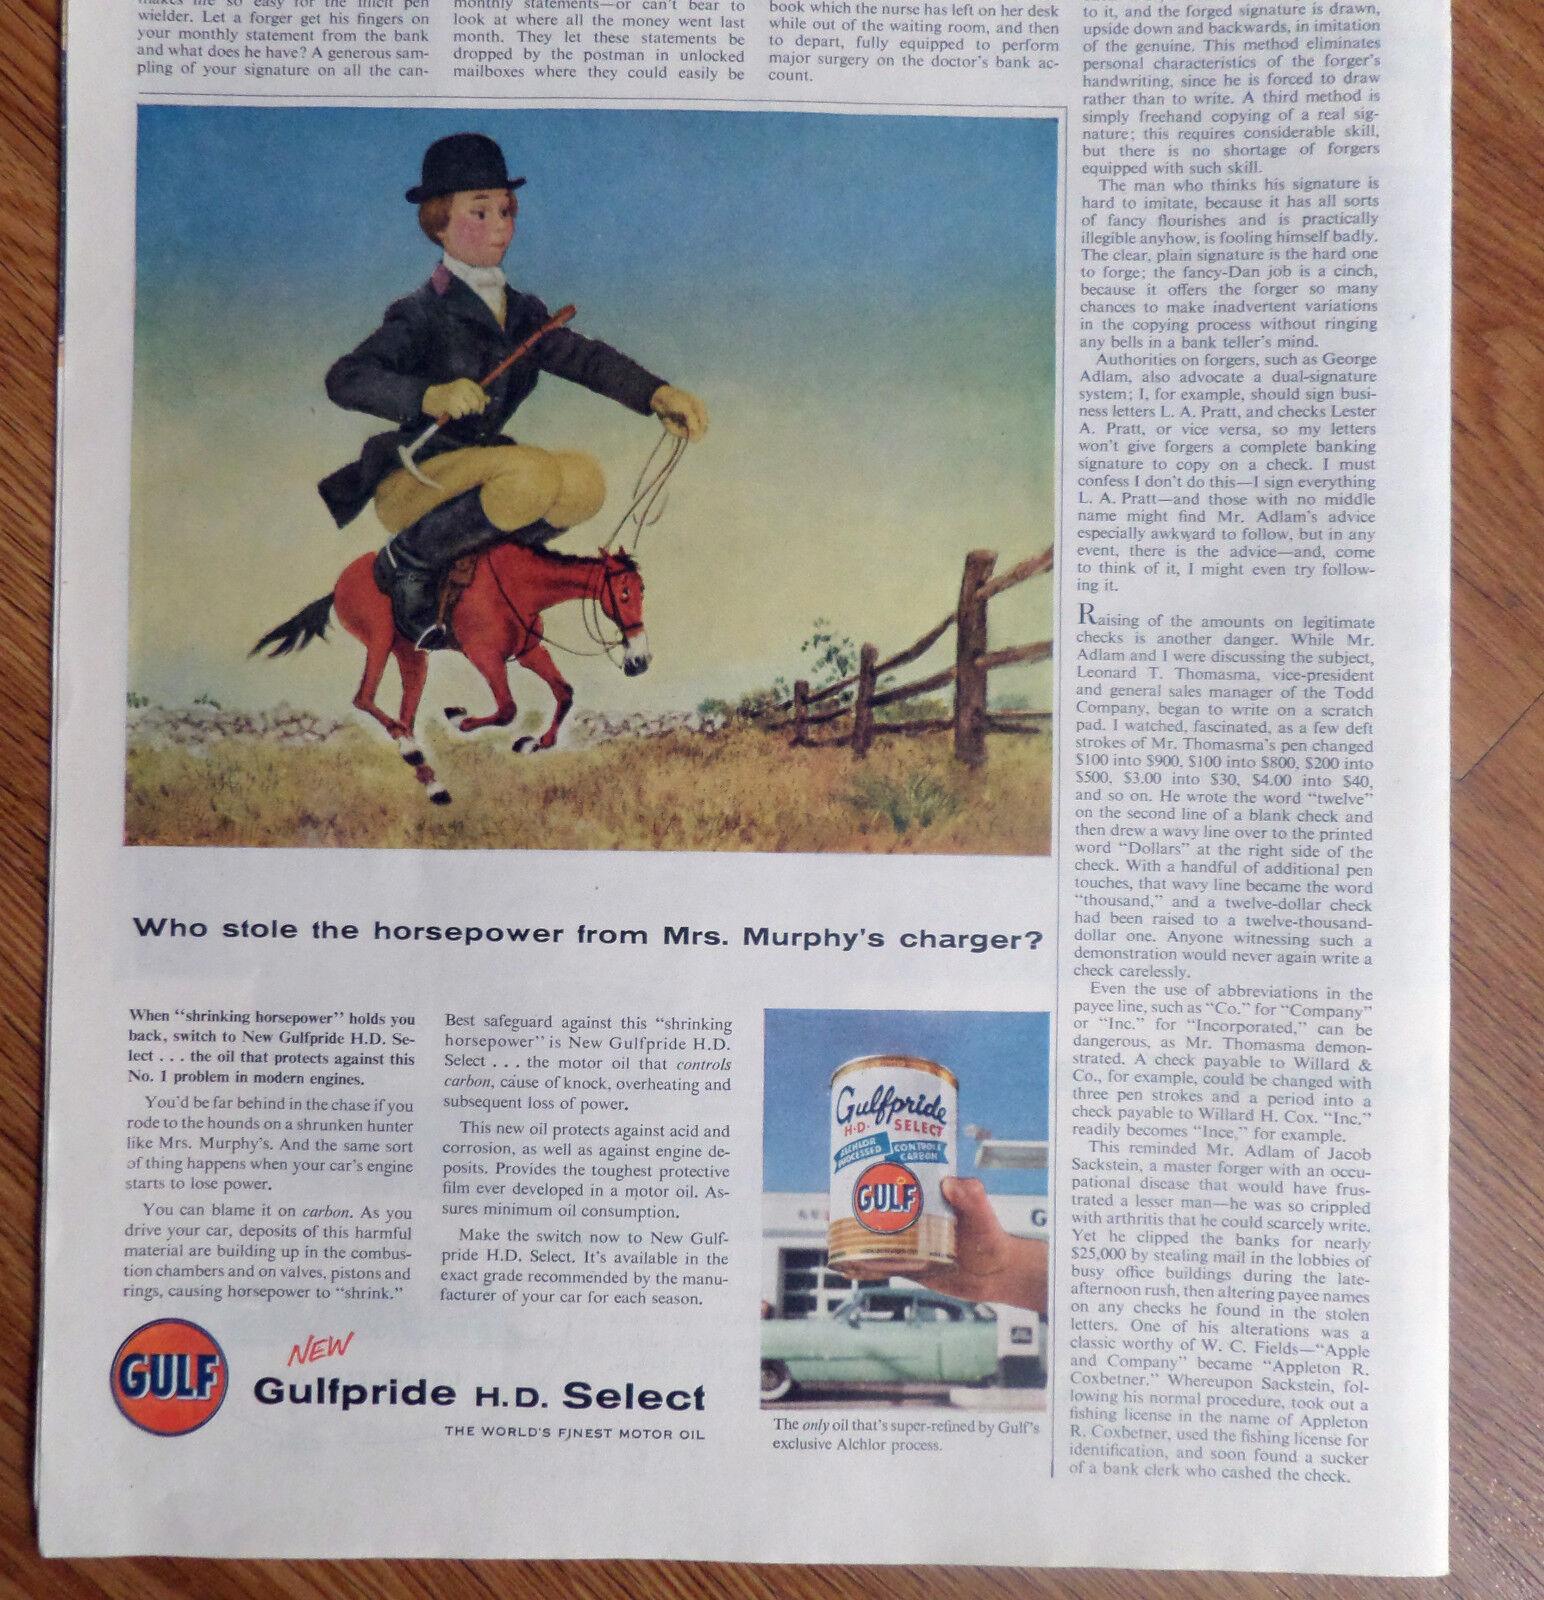 1956 Gulf Gulfpride H D Select Oil Ad Who Stole Horsepower Mrs Murphy\'s Charger?